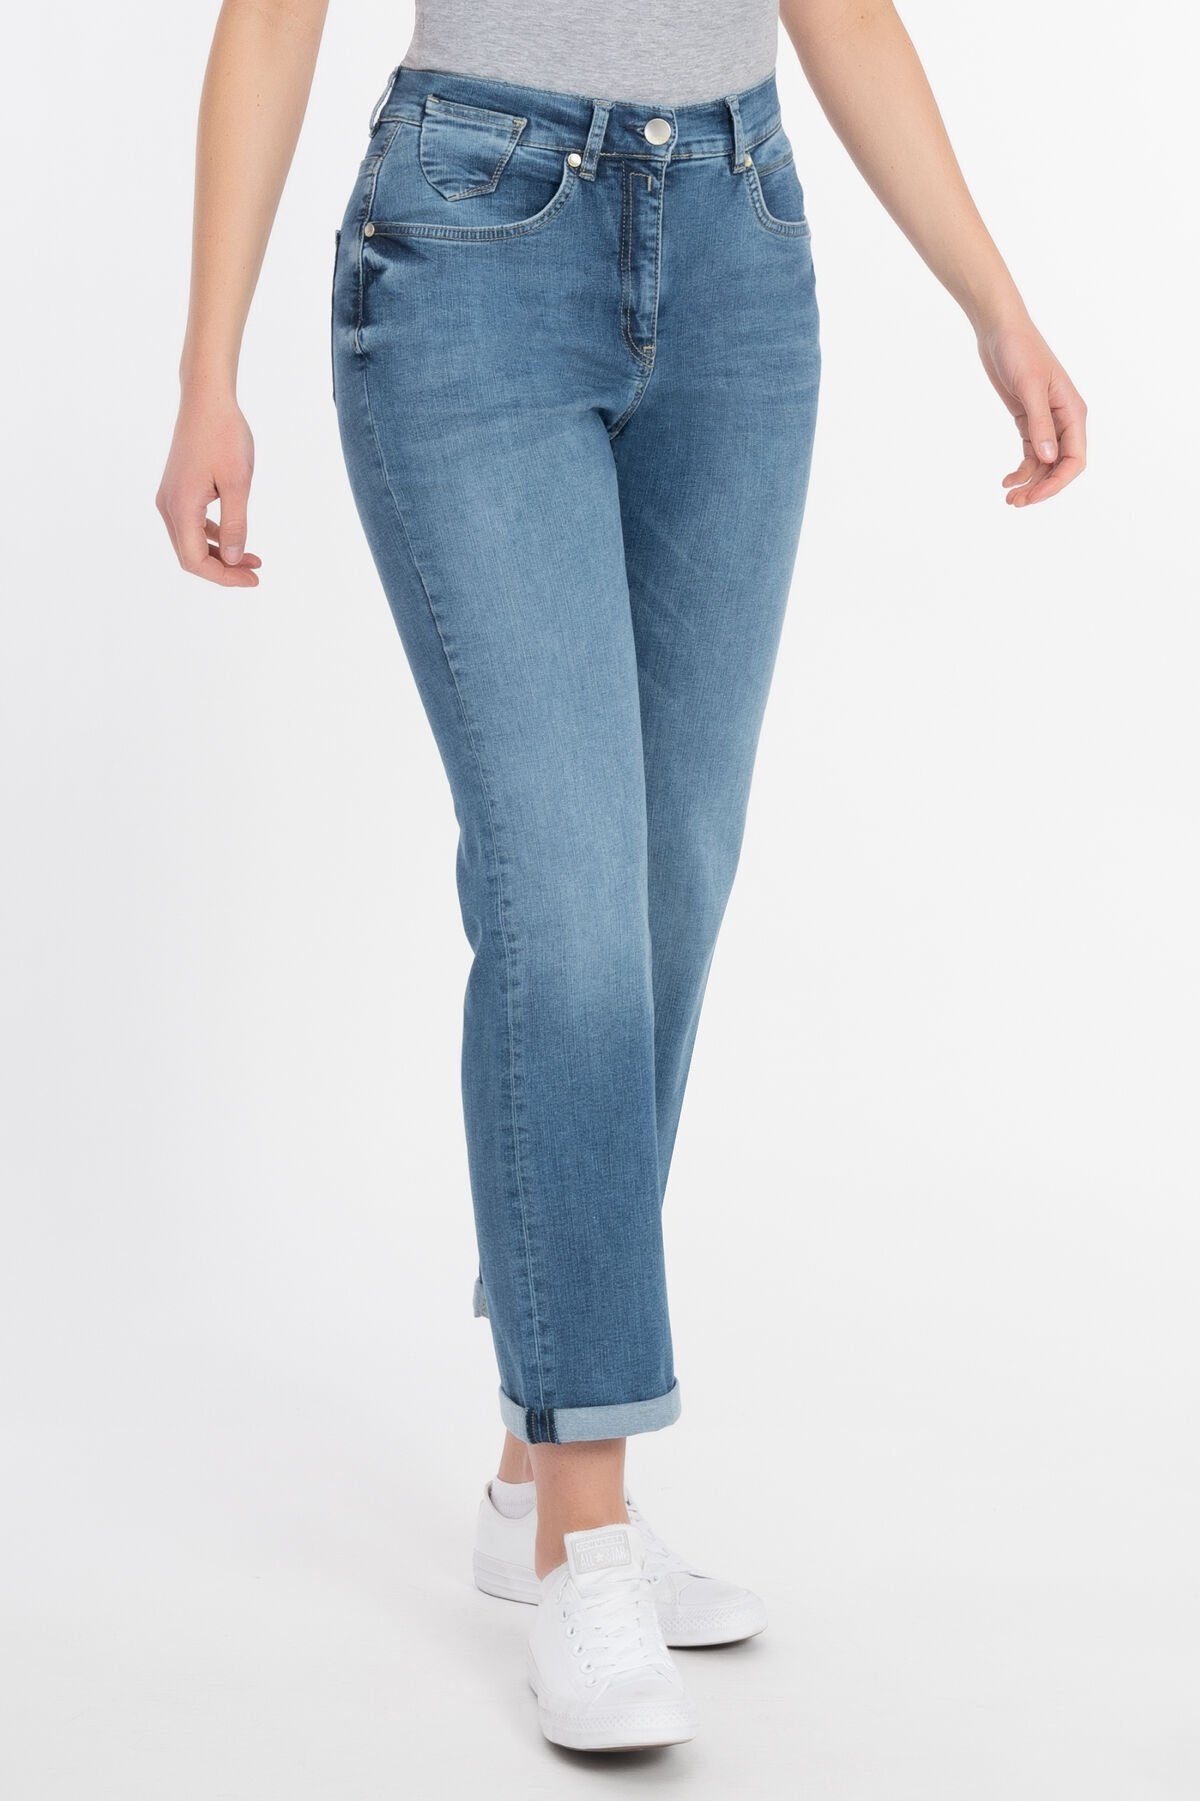 Waschung in Recover 5-Pocket-Jeans Pants authentischer Hazel